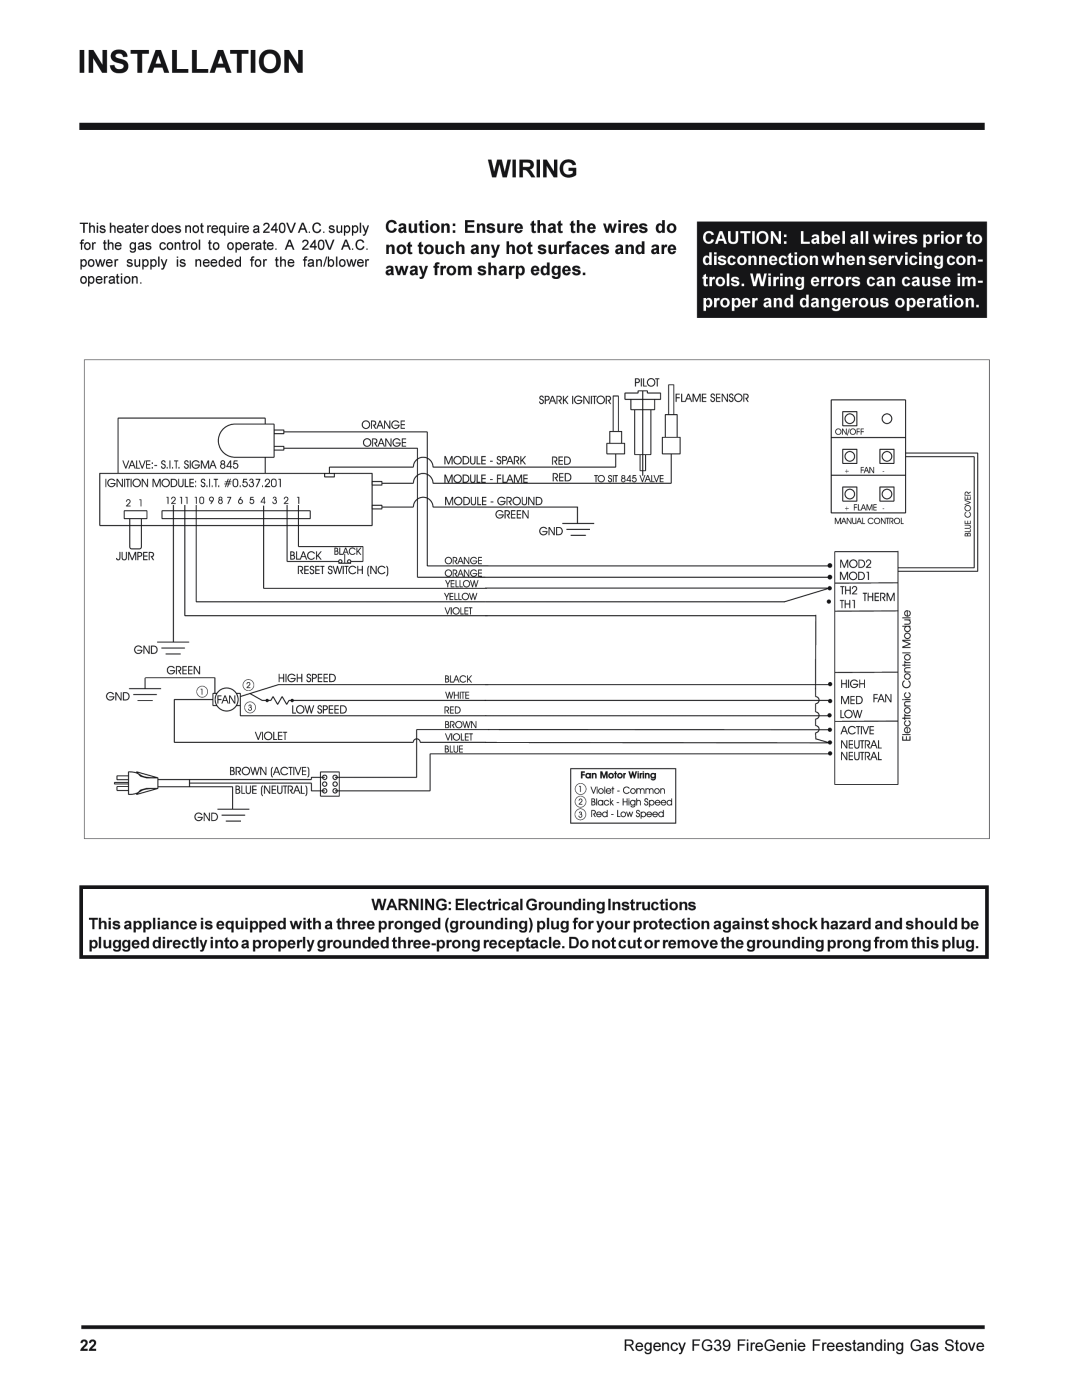 Regency FG39-LPG, FG39-NG installation manual Wiring, away from sharp edges, WARNING Electrical Grounding Instructions 